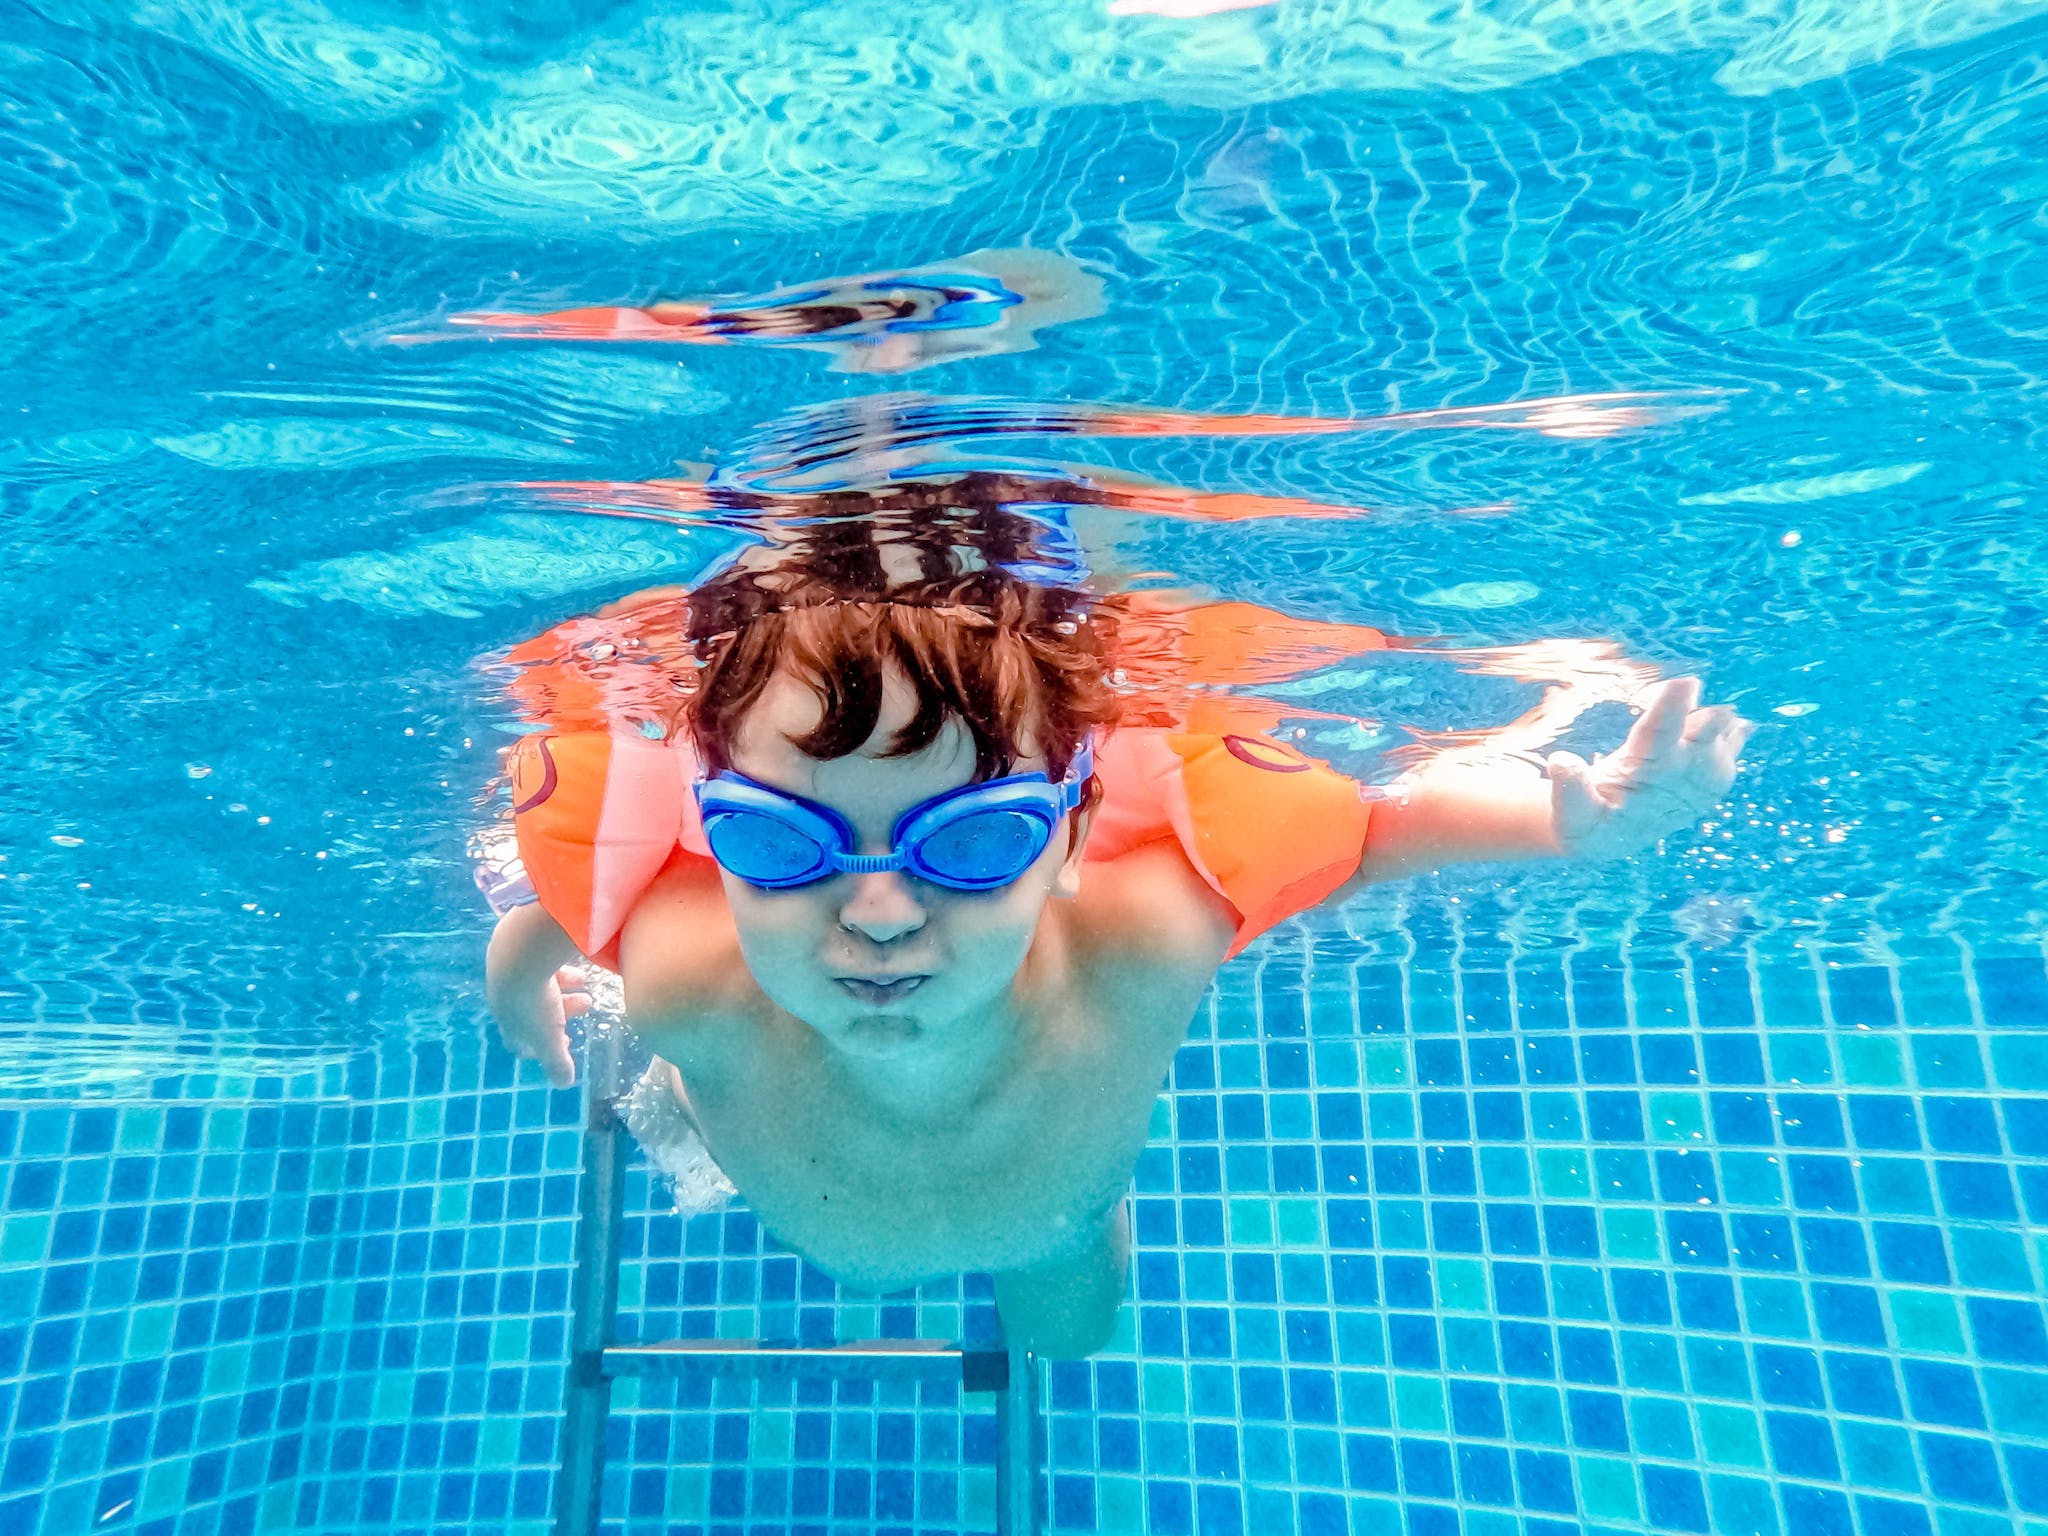 A Boy in Blue Goggles Swimming in a Pool